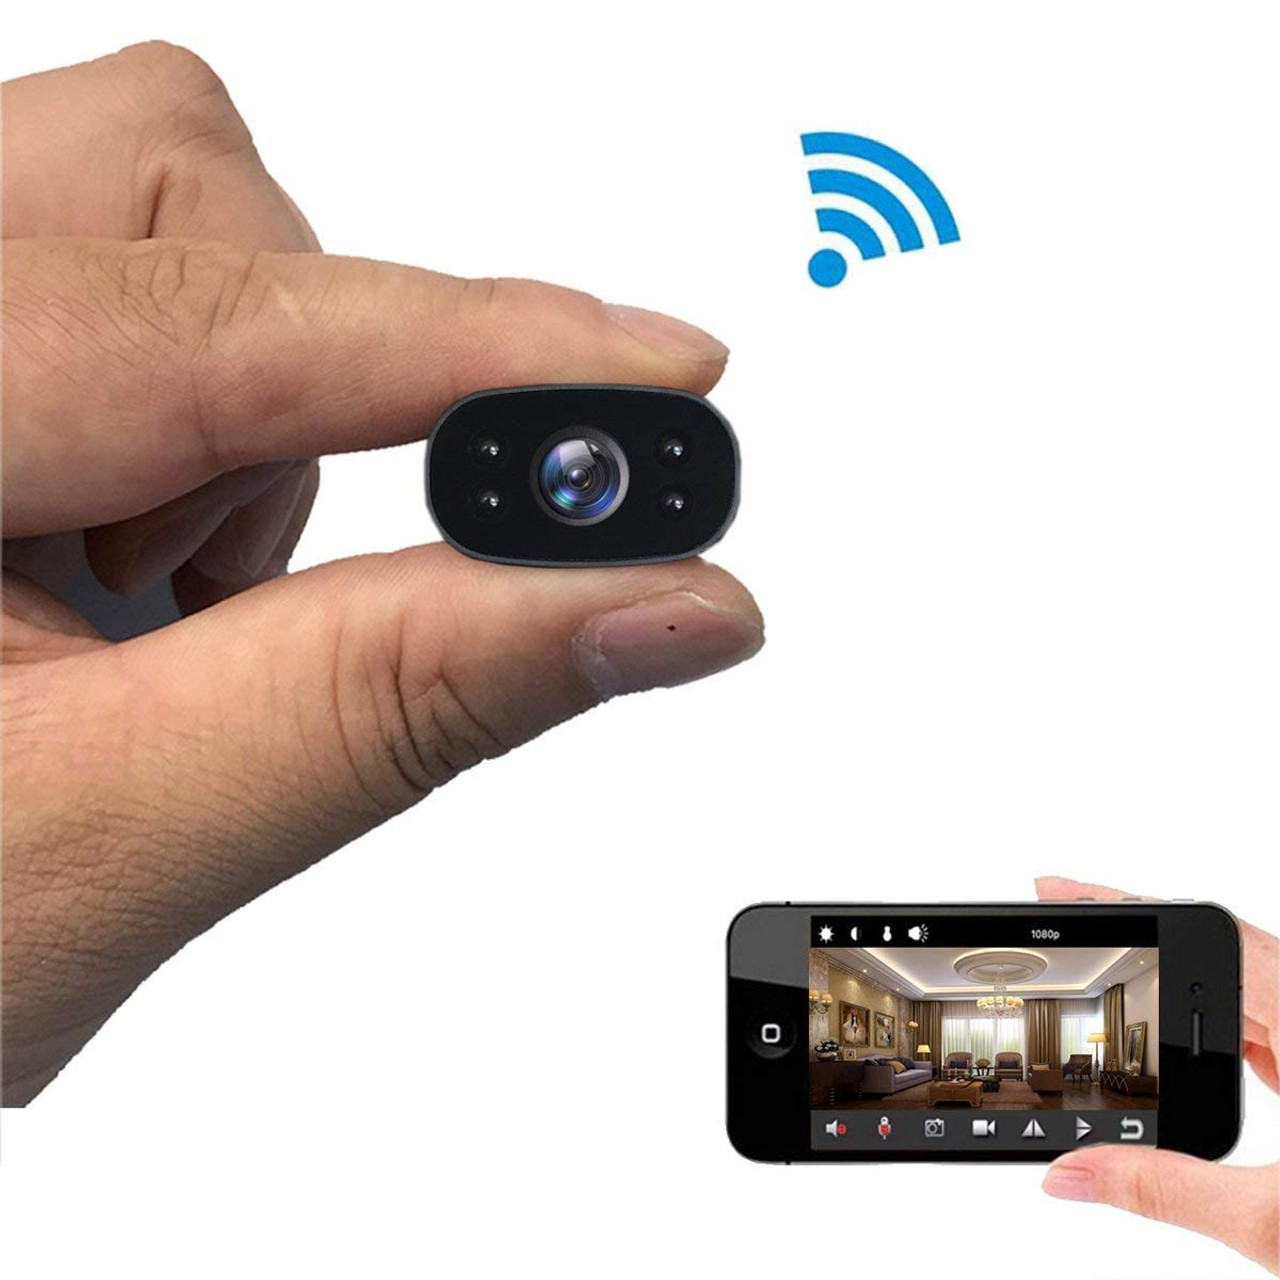  Upgraded Mini Spy Camera 1080P Hidden Camera V2.0 - Portable  Small HD Nanny Cam with Night Vision & Motion Detection - New Software - Hidden  Spy Cam - Indoor Security